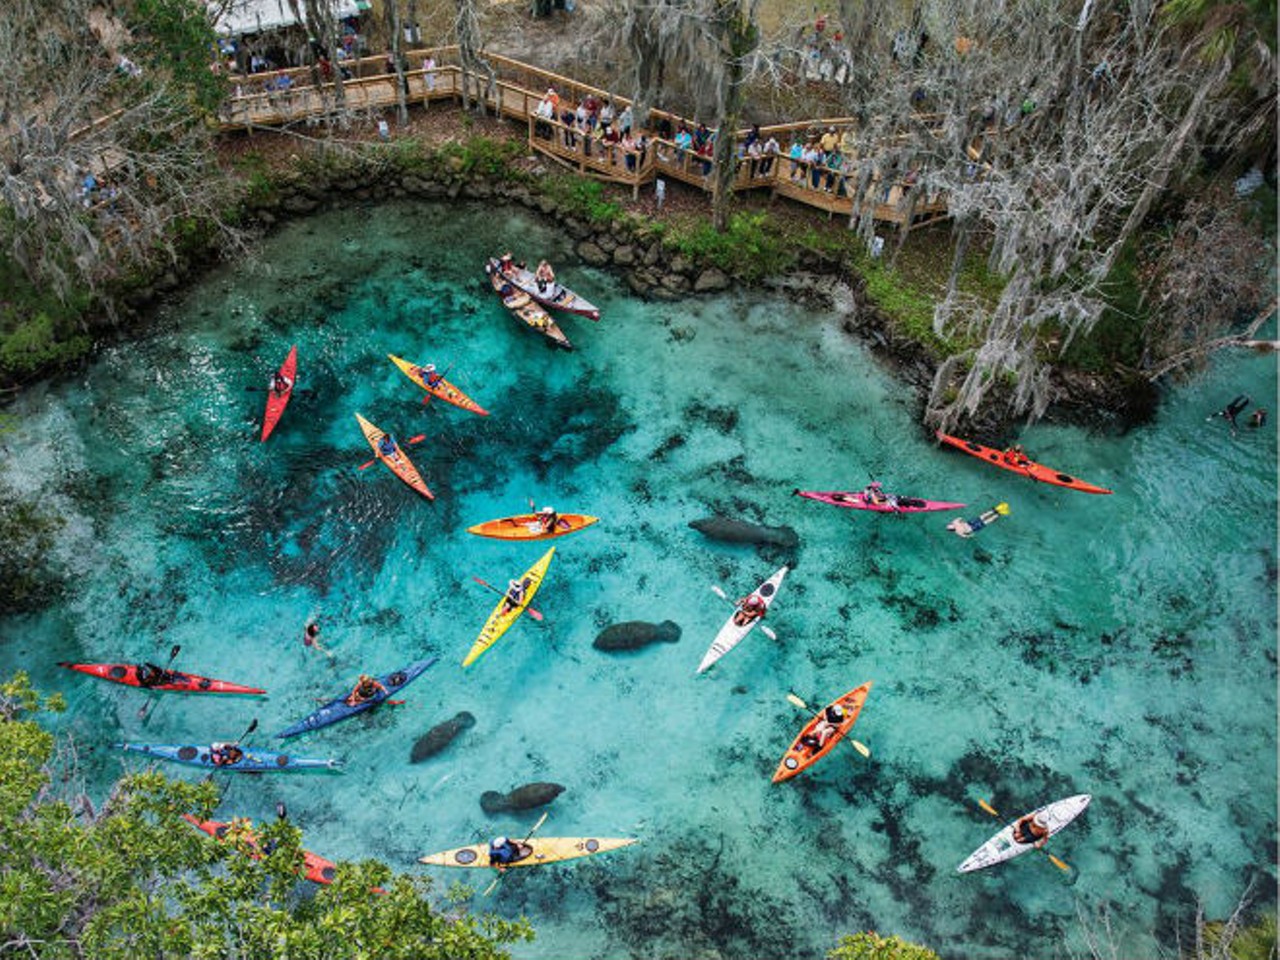 Swim with the manatees at Blue Springs
2100 W. French Ave.; 386-775-3663; floridastateparks.org
"Take a kayak tour of a bioluminescent lagoon at the Merritt Island National Wildlife Refuge near Titusville. A guide from A Day Away Kayak Tours  will help make sure you don't lose your way in the dark."
Photo via Florida State Parks